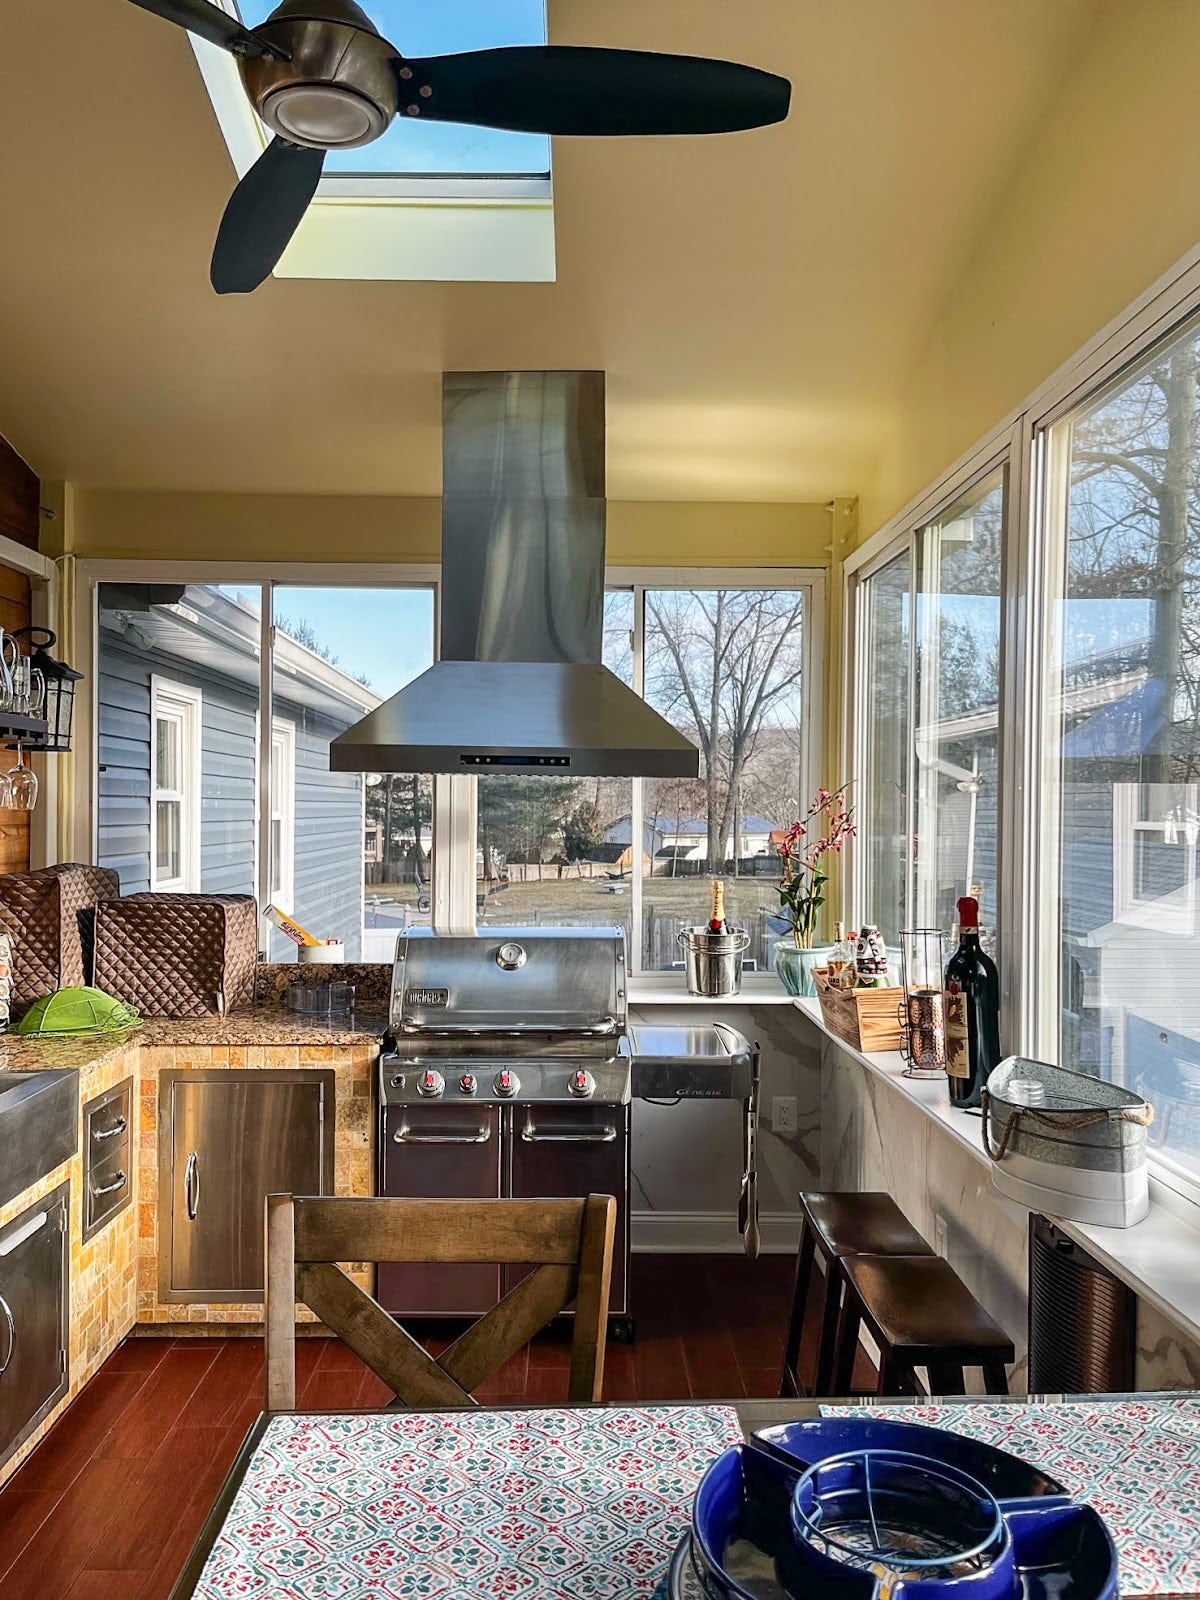 Bright and homey kitchen nook featuring an indoor grilling station with a view of the neighborhood through surrounding windows.